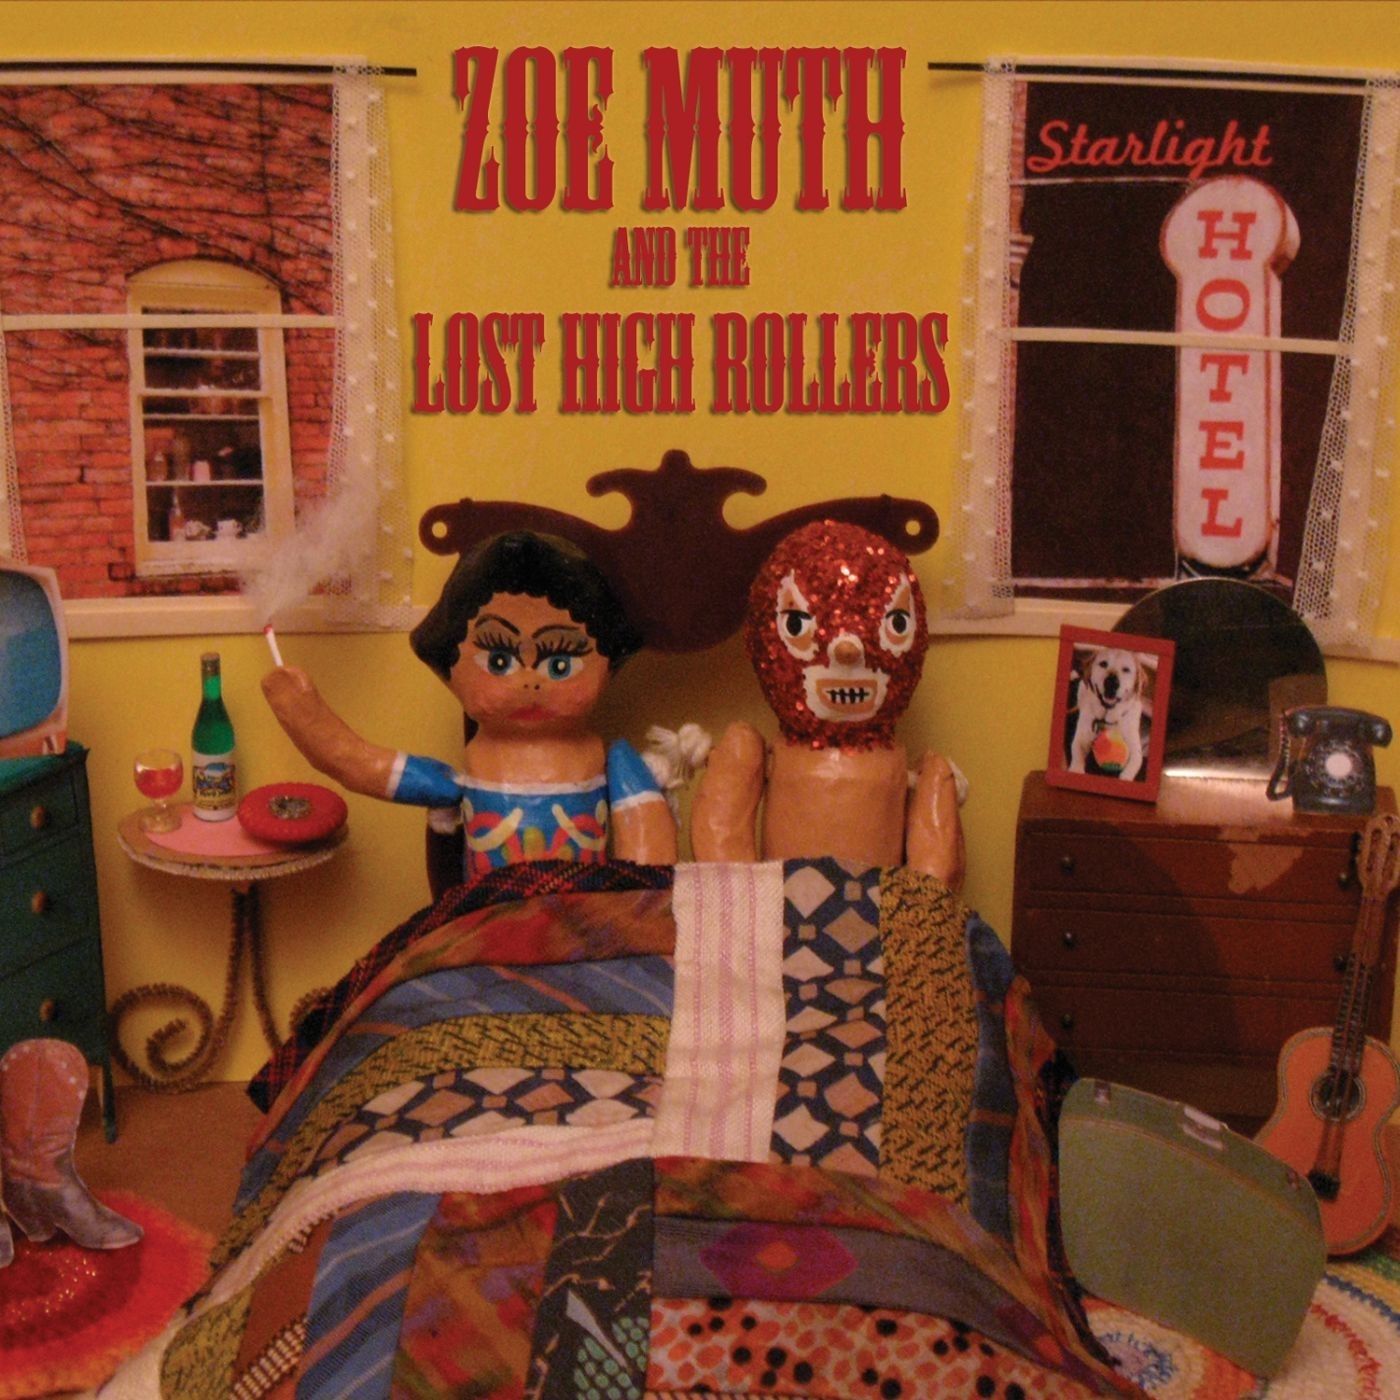 Zoe Muth & The Lost High Rollers · World Of Strangers (2014 · FLAC+MP3)